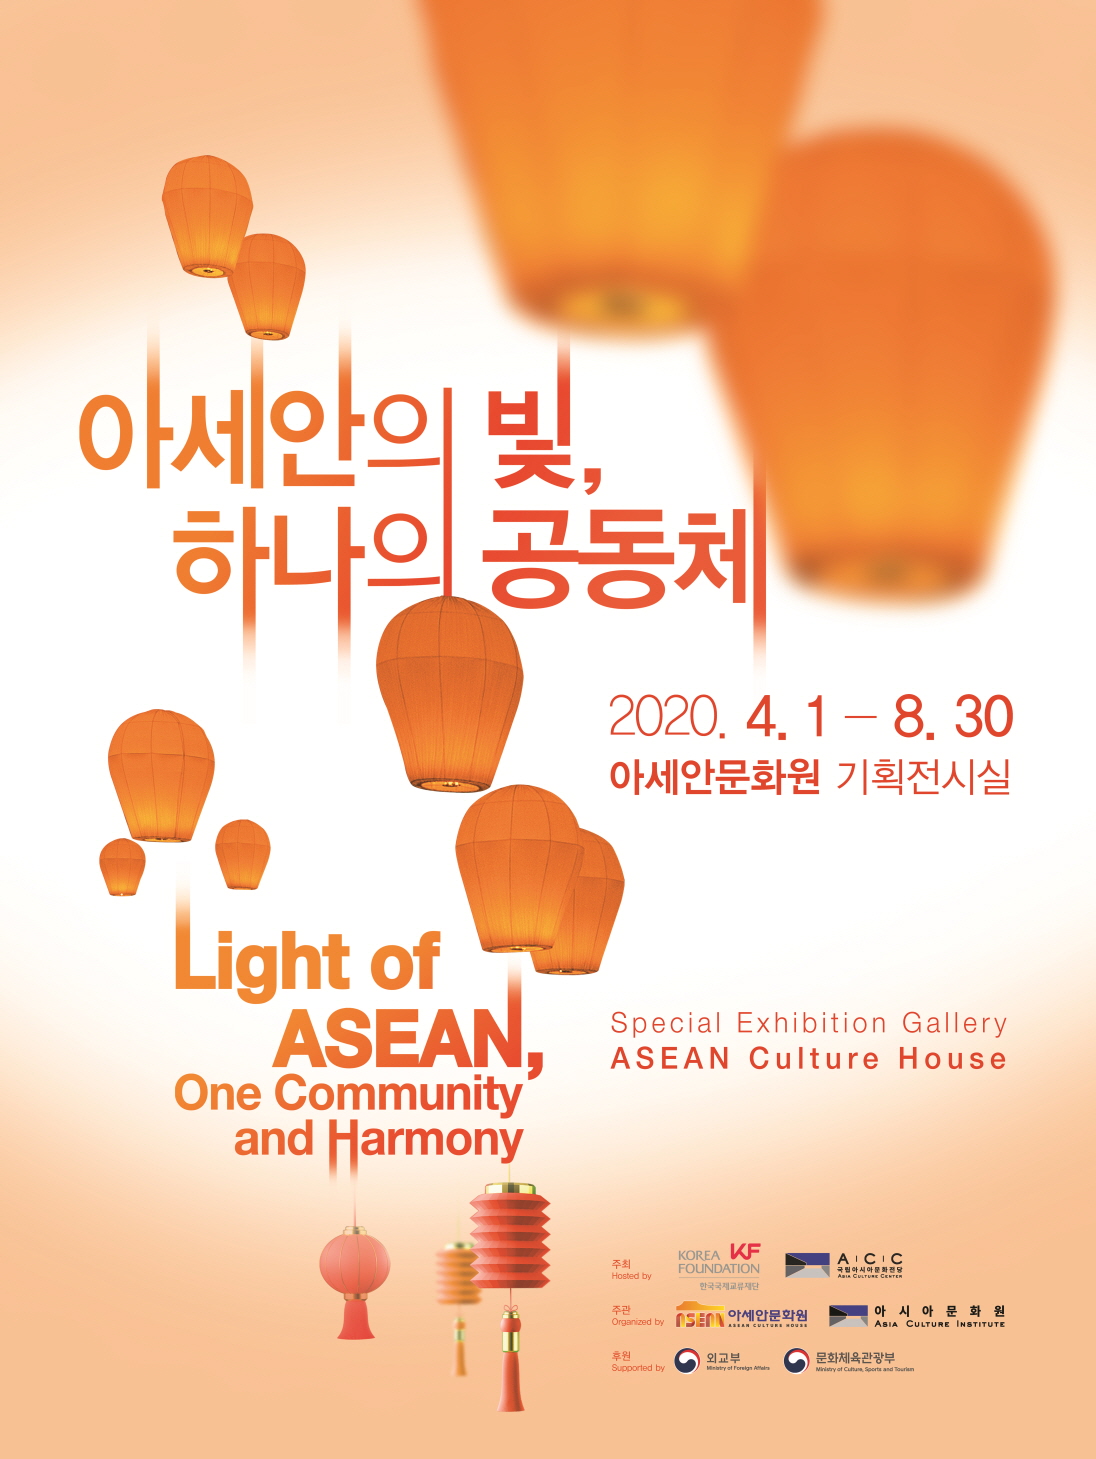 Light of ASEAN, One Community and Harmony'